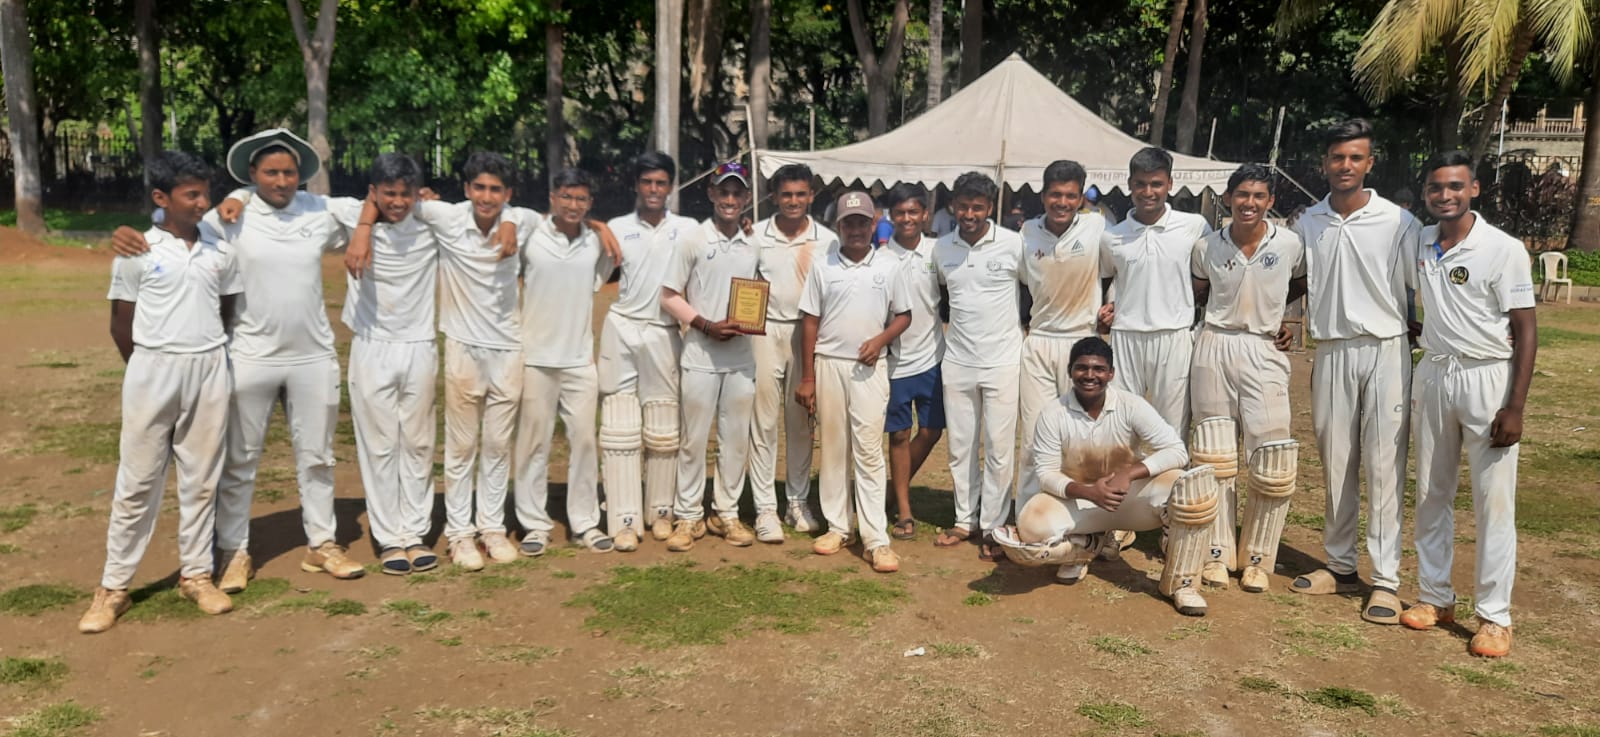 Shivaji Park Youngsters Team